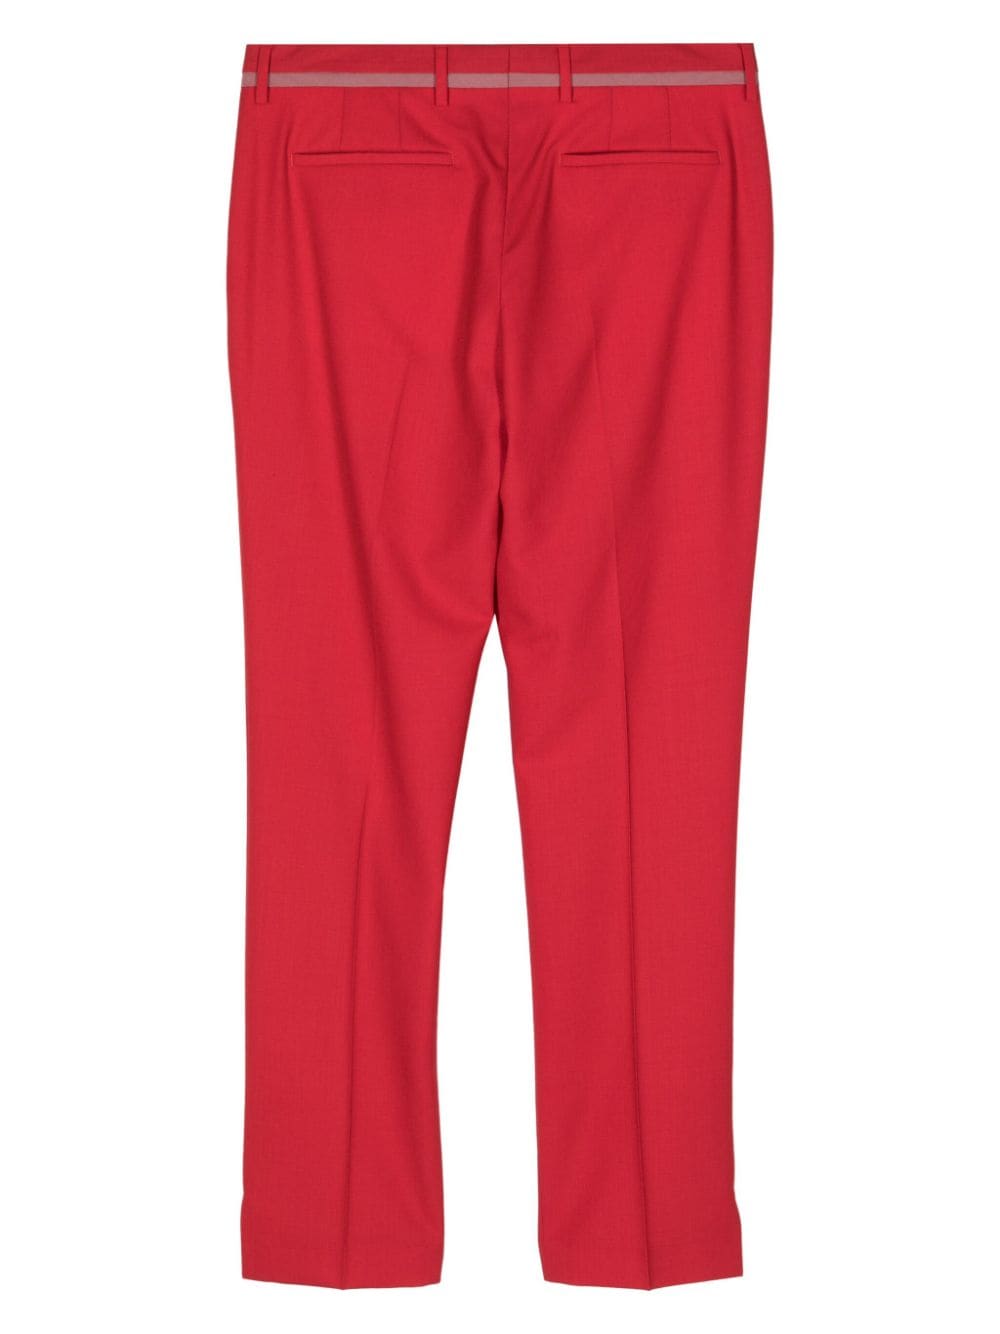 Paul Smith tailored wool trousers - Rood